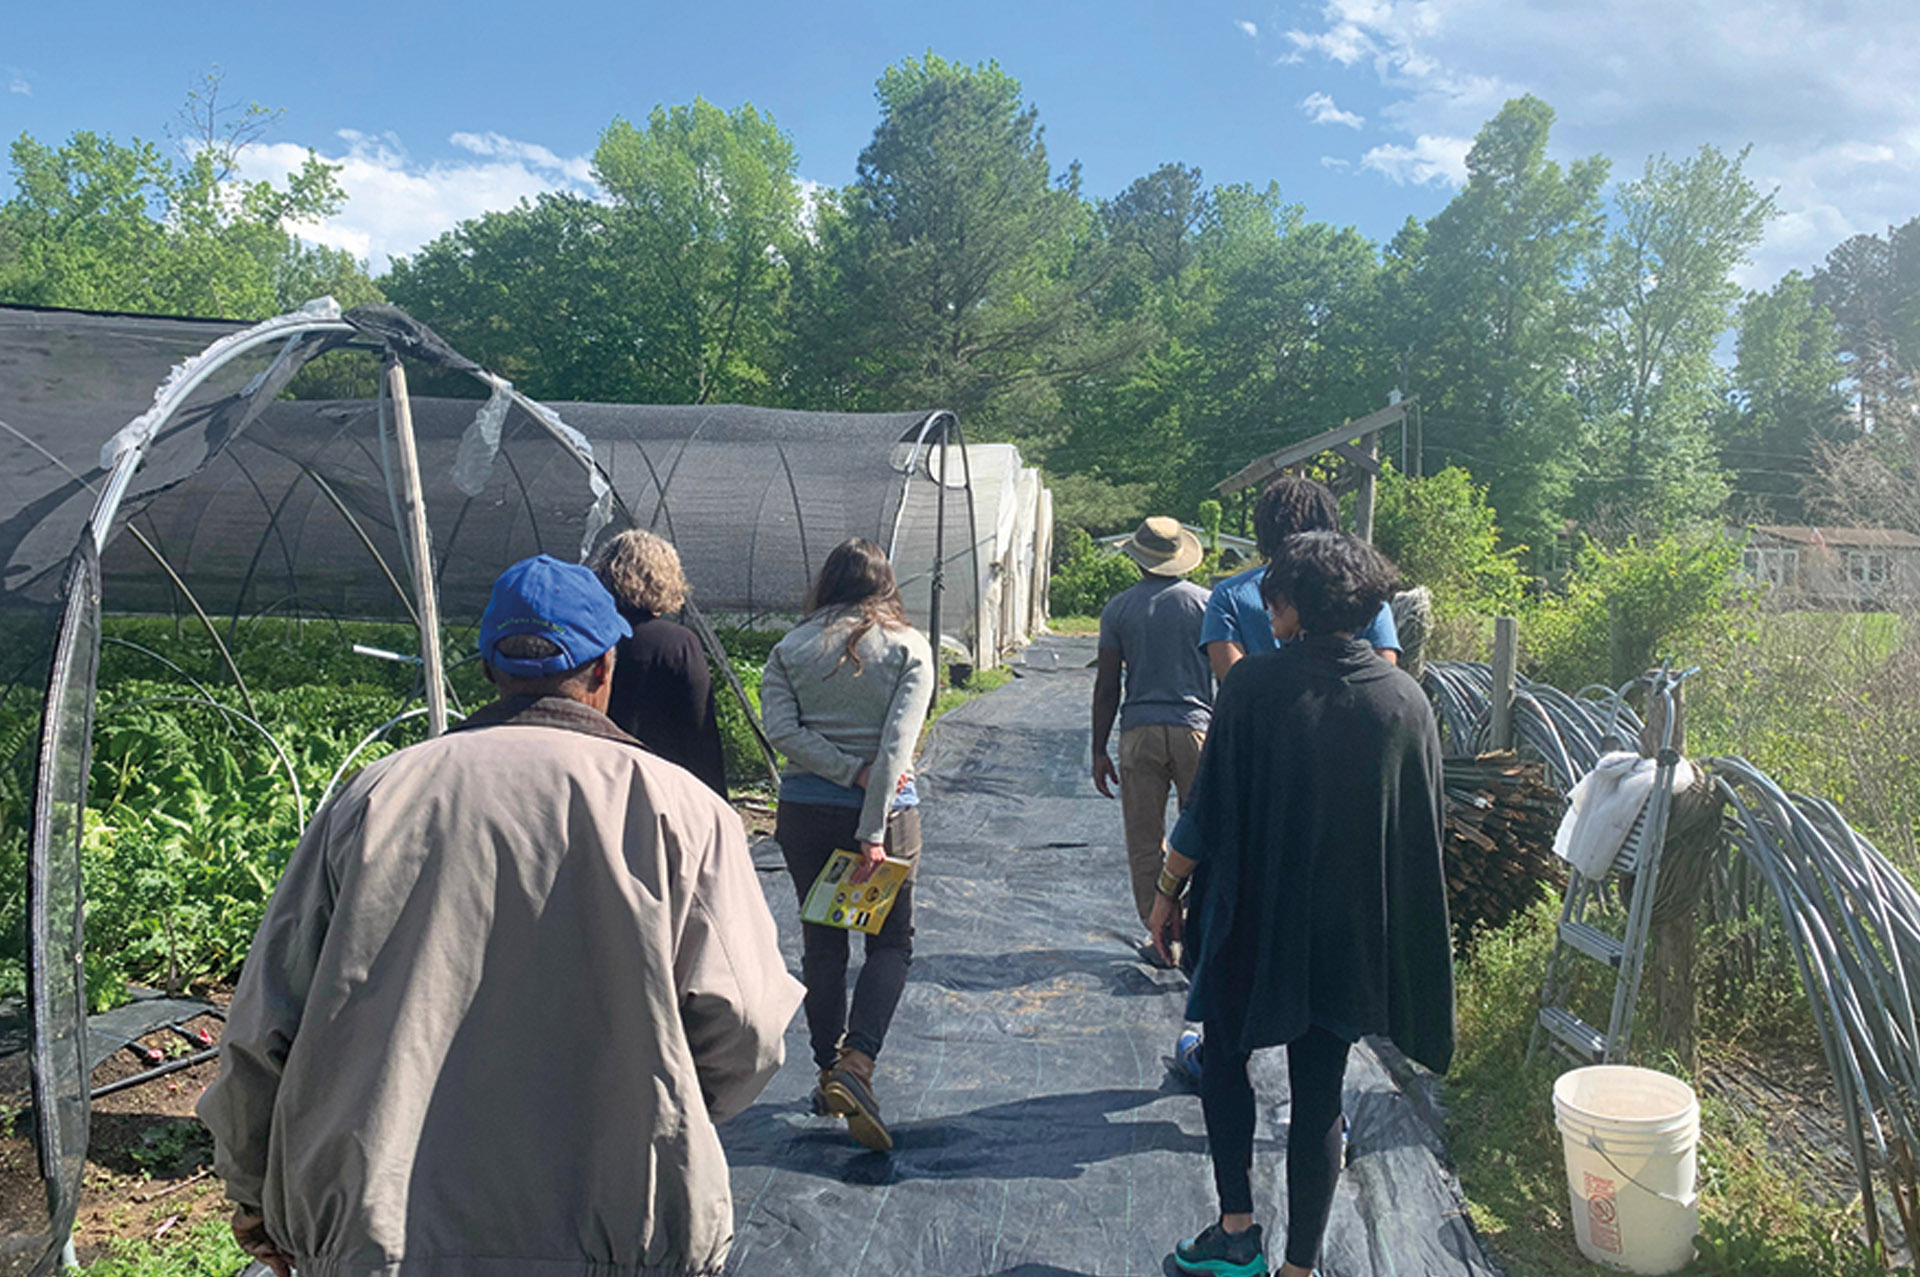 Group of people walking around greenhouses and gardens